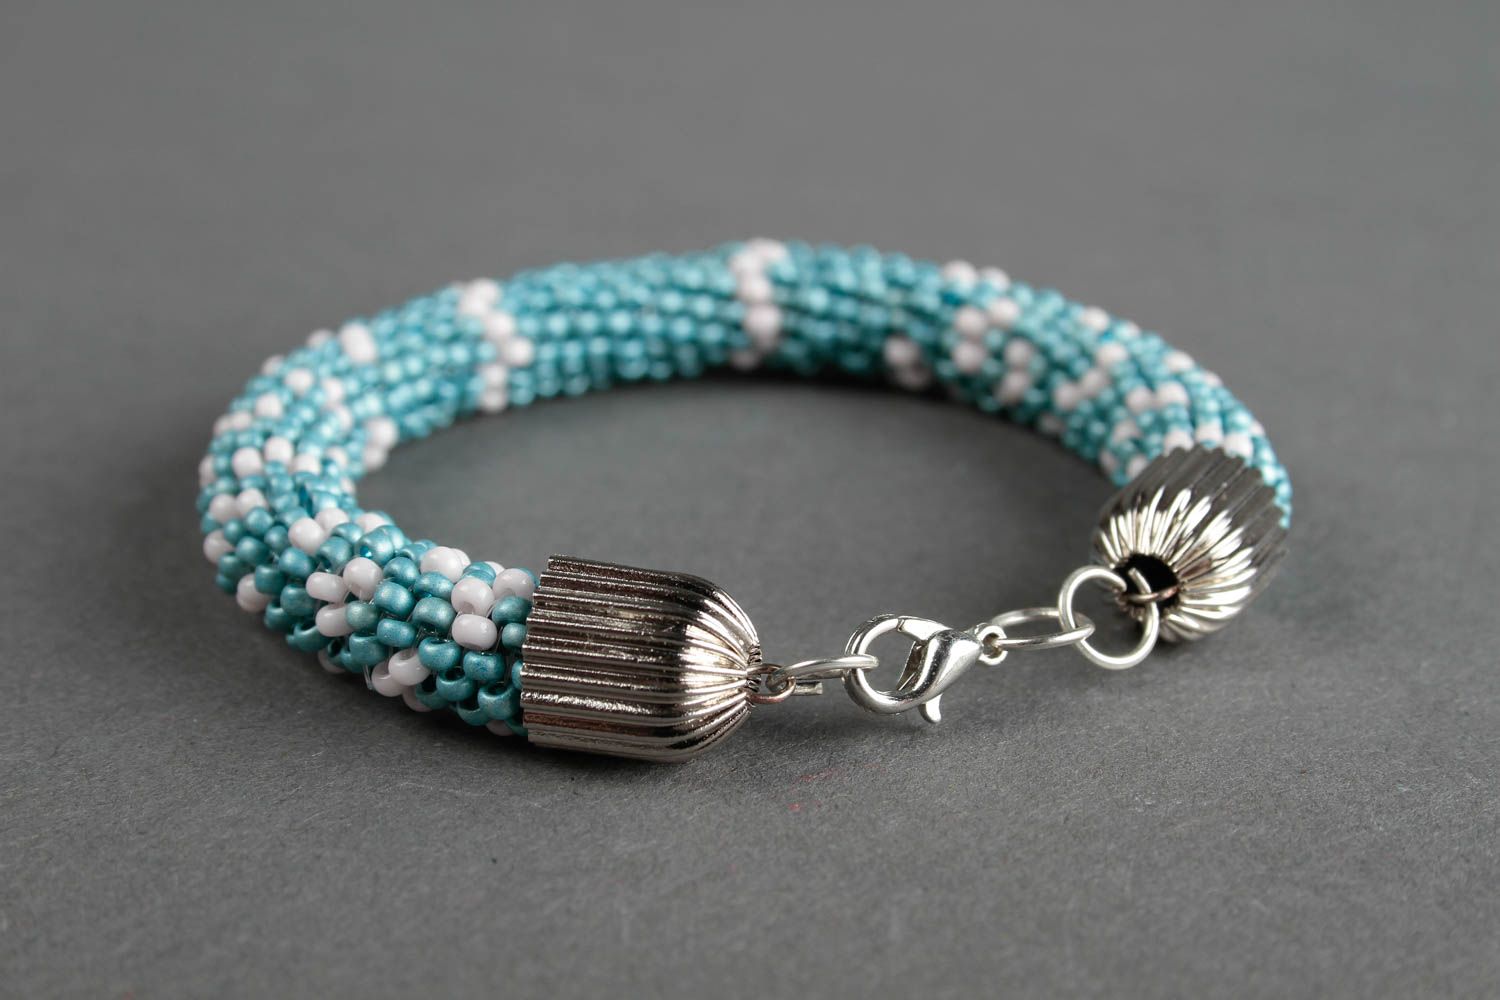 Handmade beaded cord bracelet in turquoise and white beads photo 4